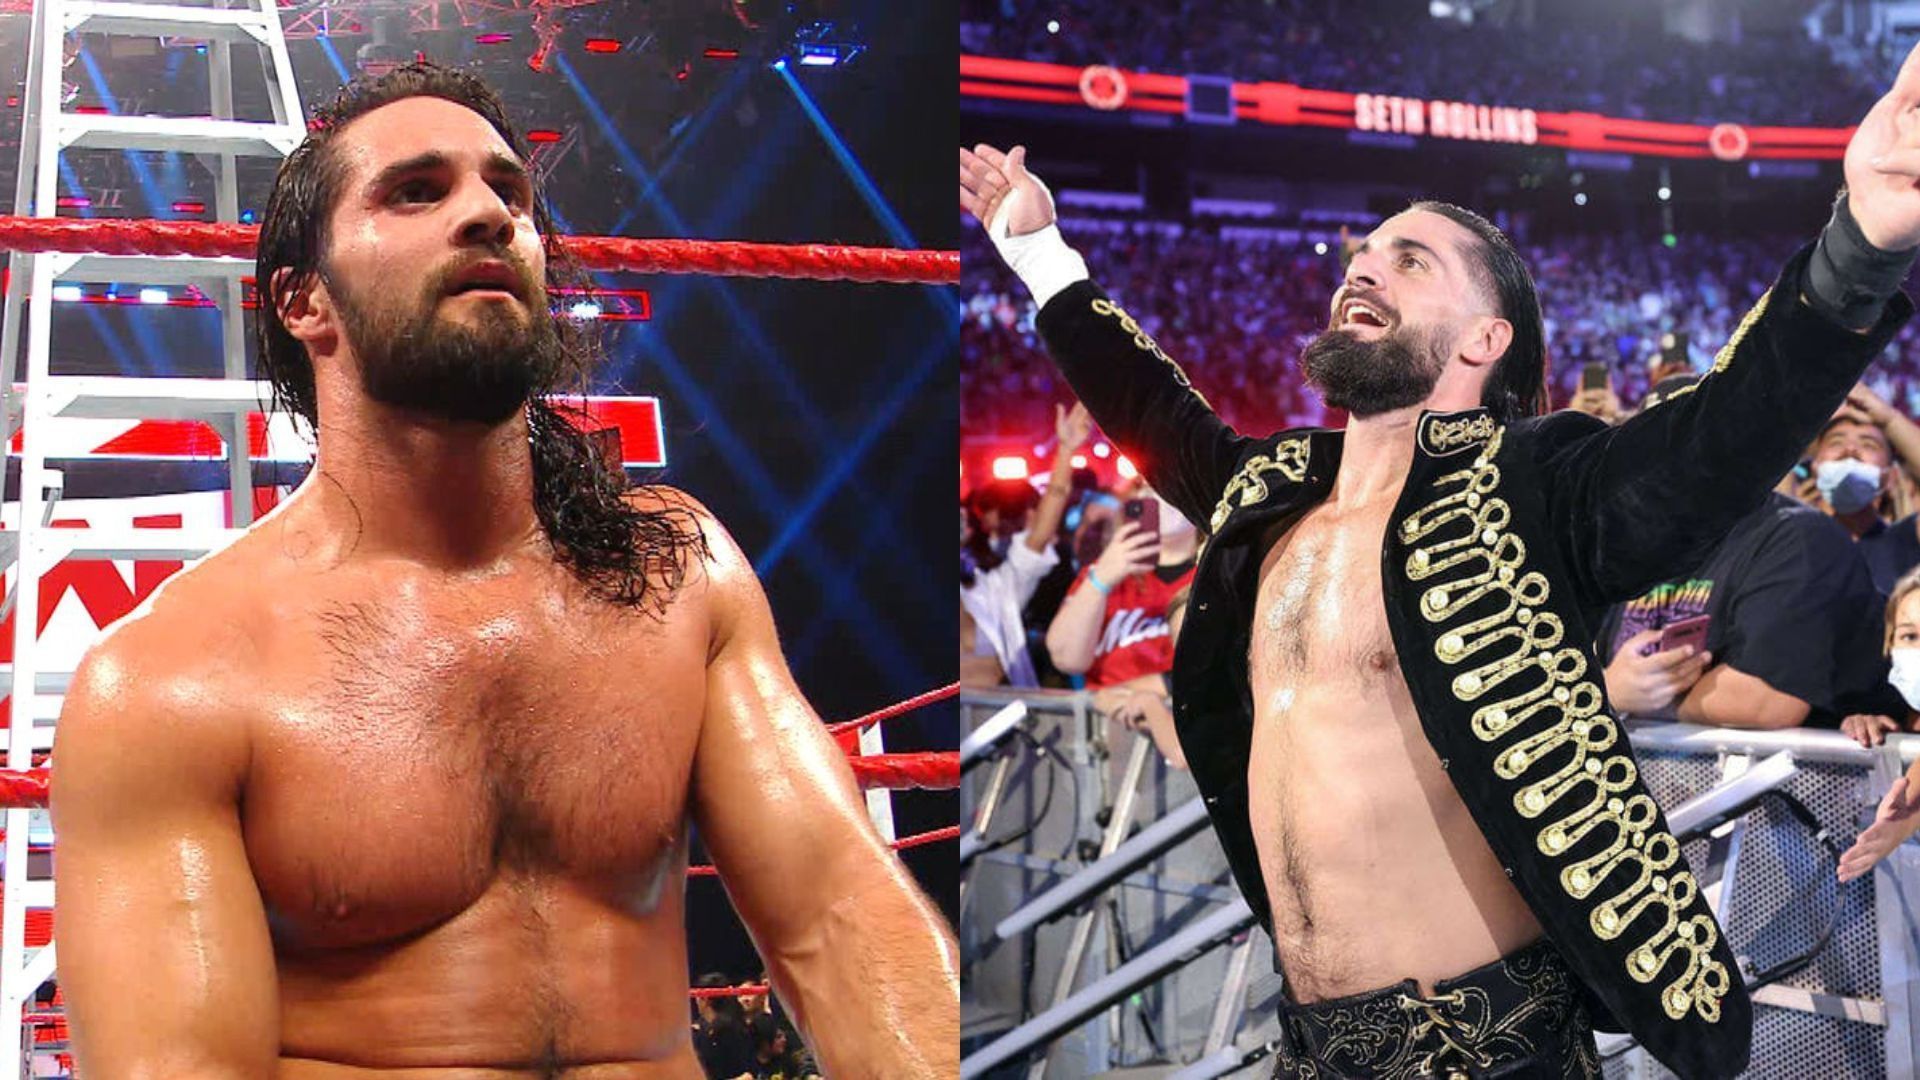 Seth Rollins successfully defended the US Championship on RAW